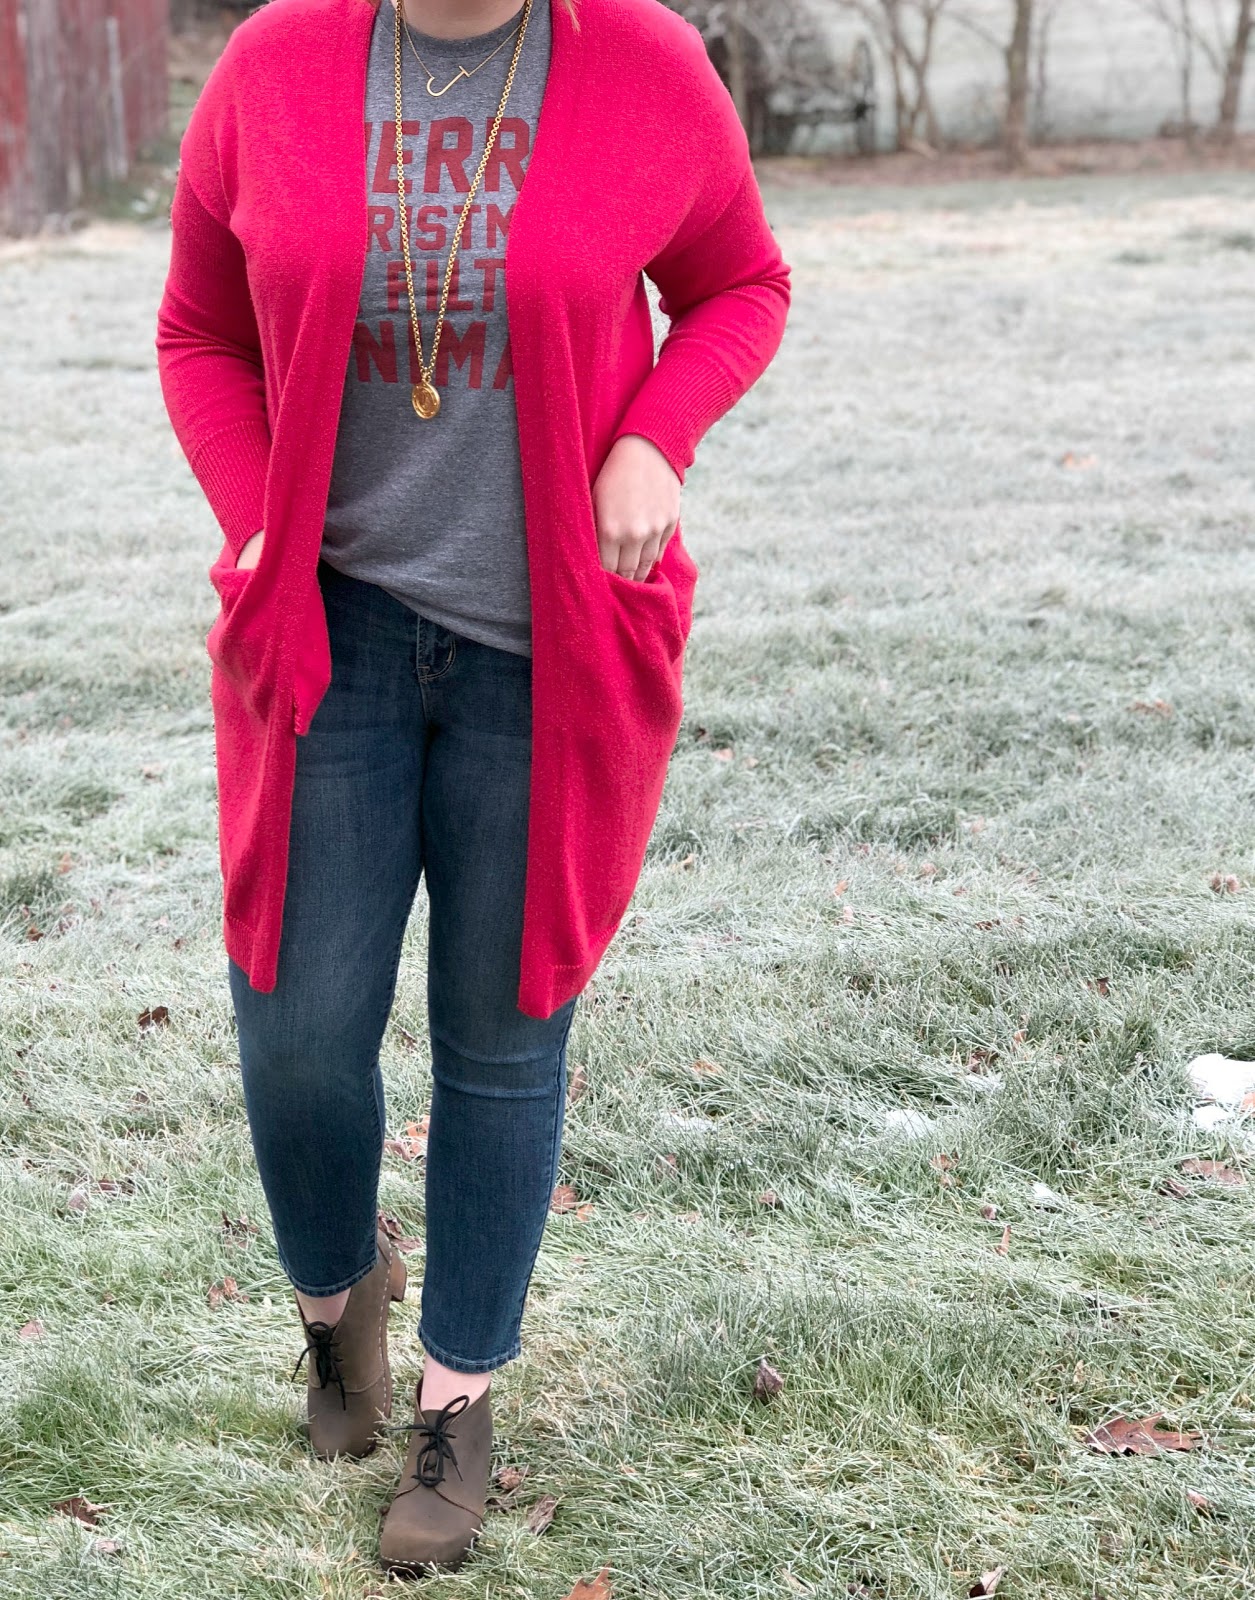 How to style a Christmas tee shirt